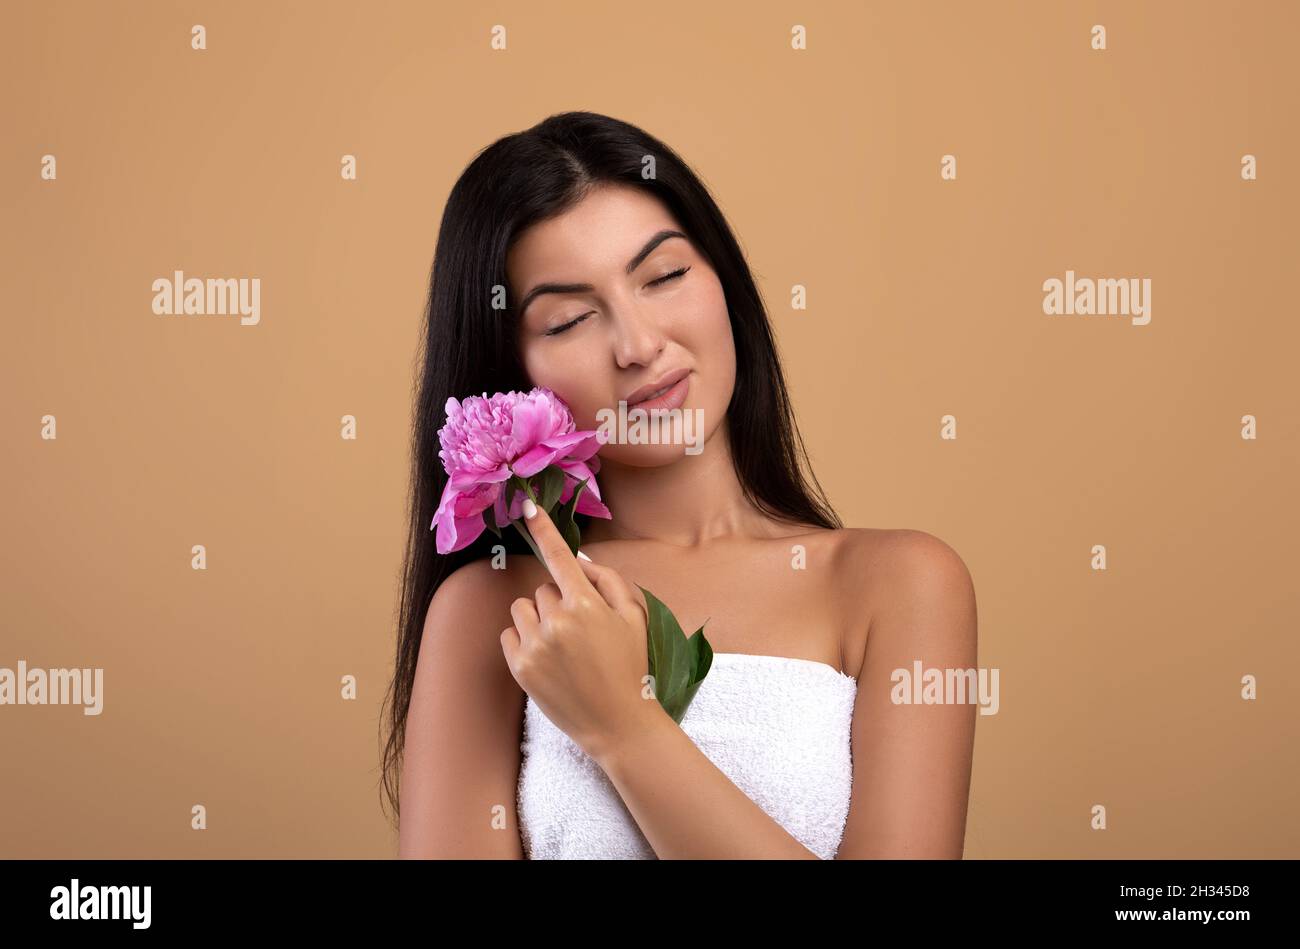 Tender armenian woman holding beautiful peony flower and closing eyes, posing over beige studio background. Portrait of lady having silky skin and nud Stock Photo